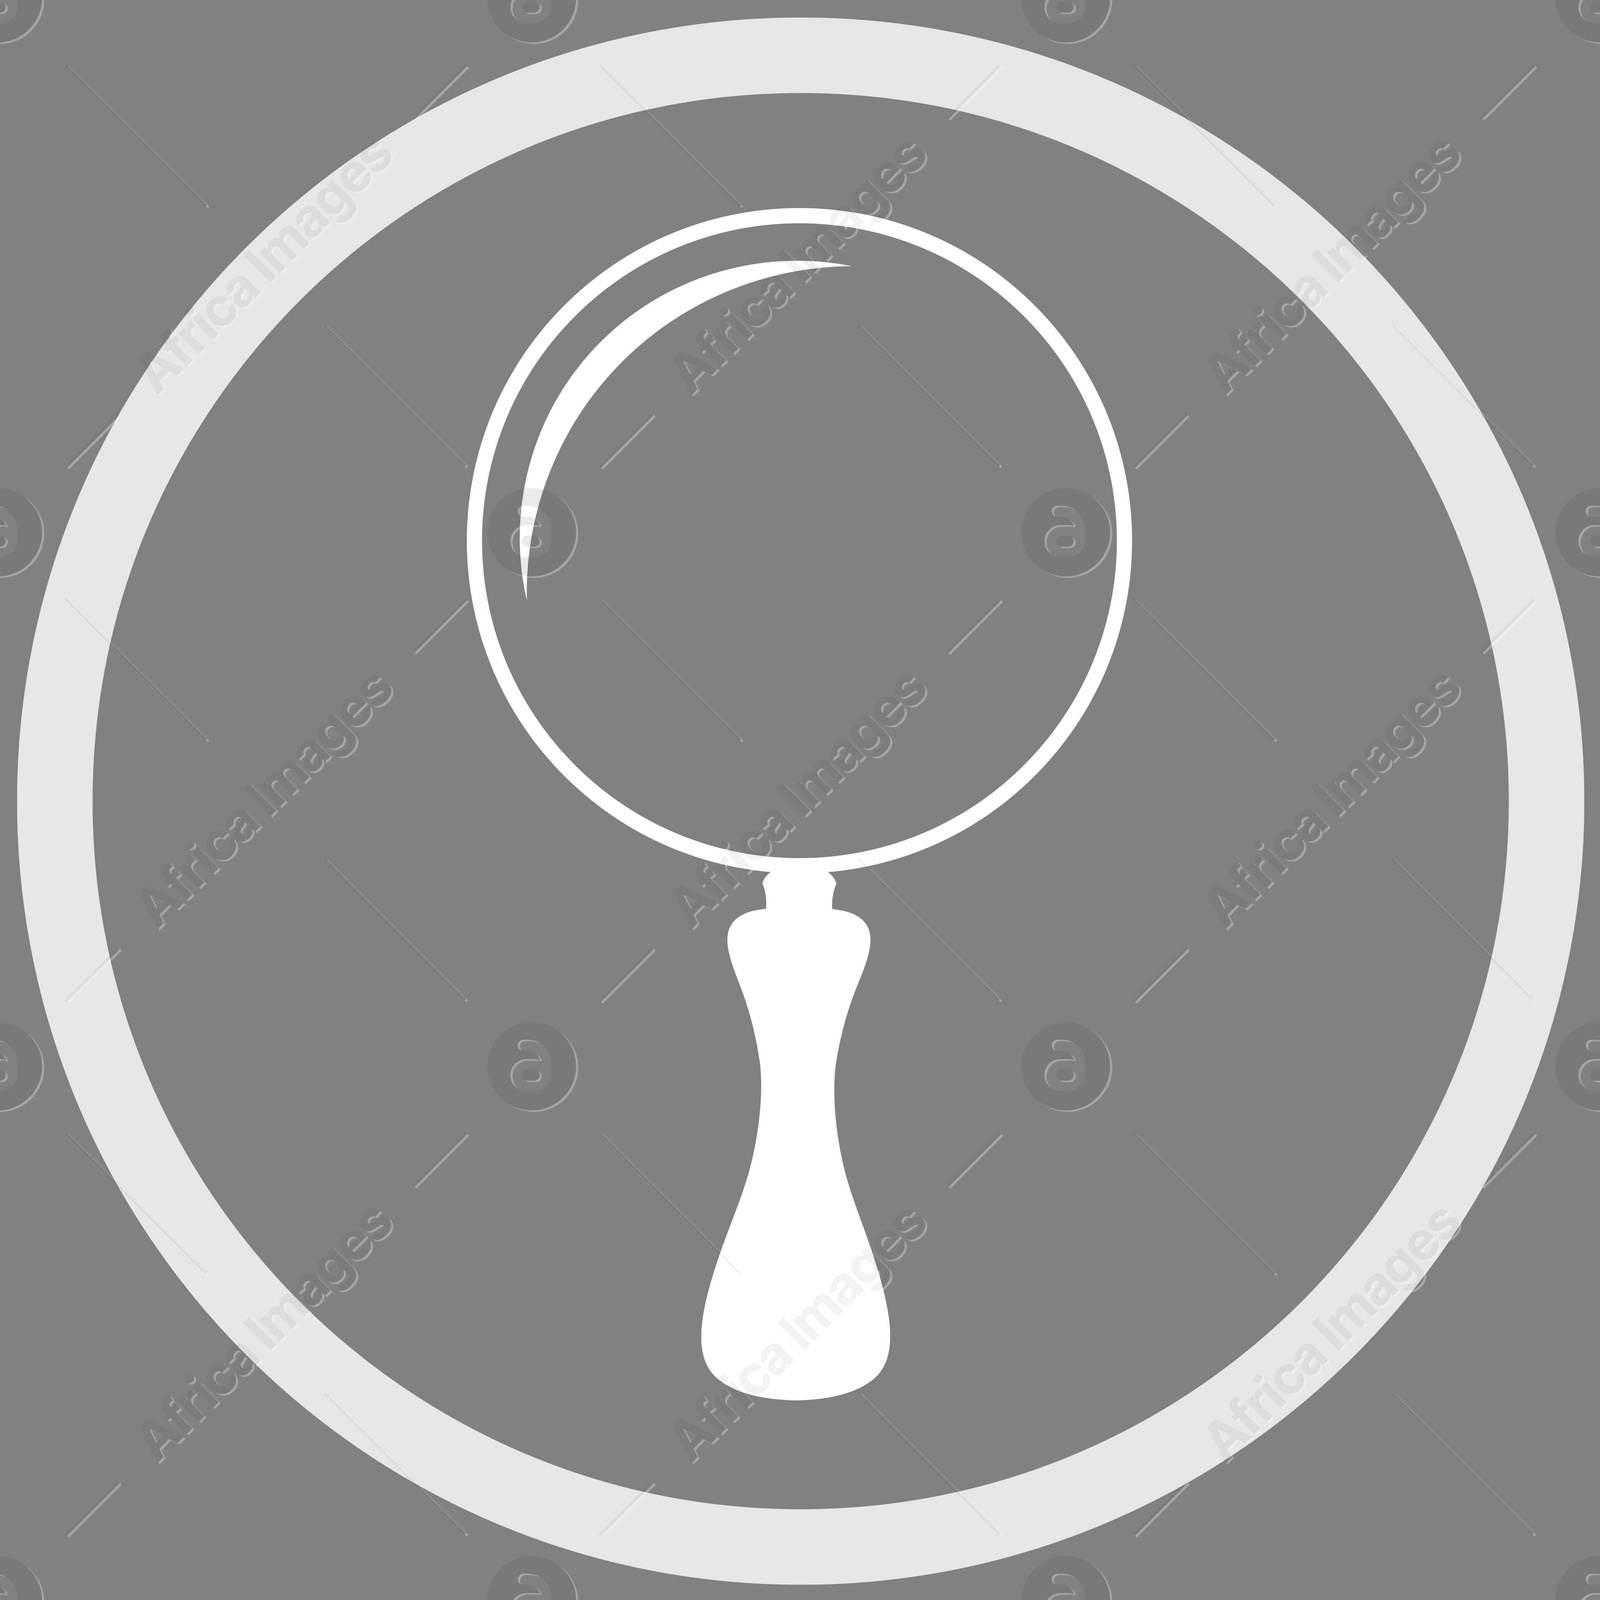 Image of Magnifying glass in frame, illustration on grey background